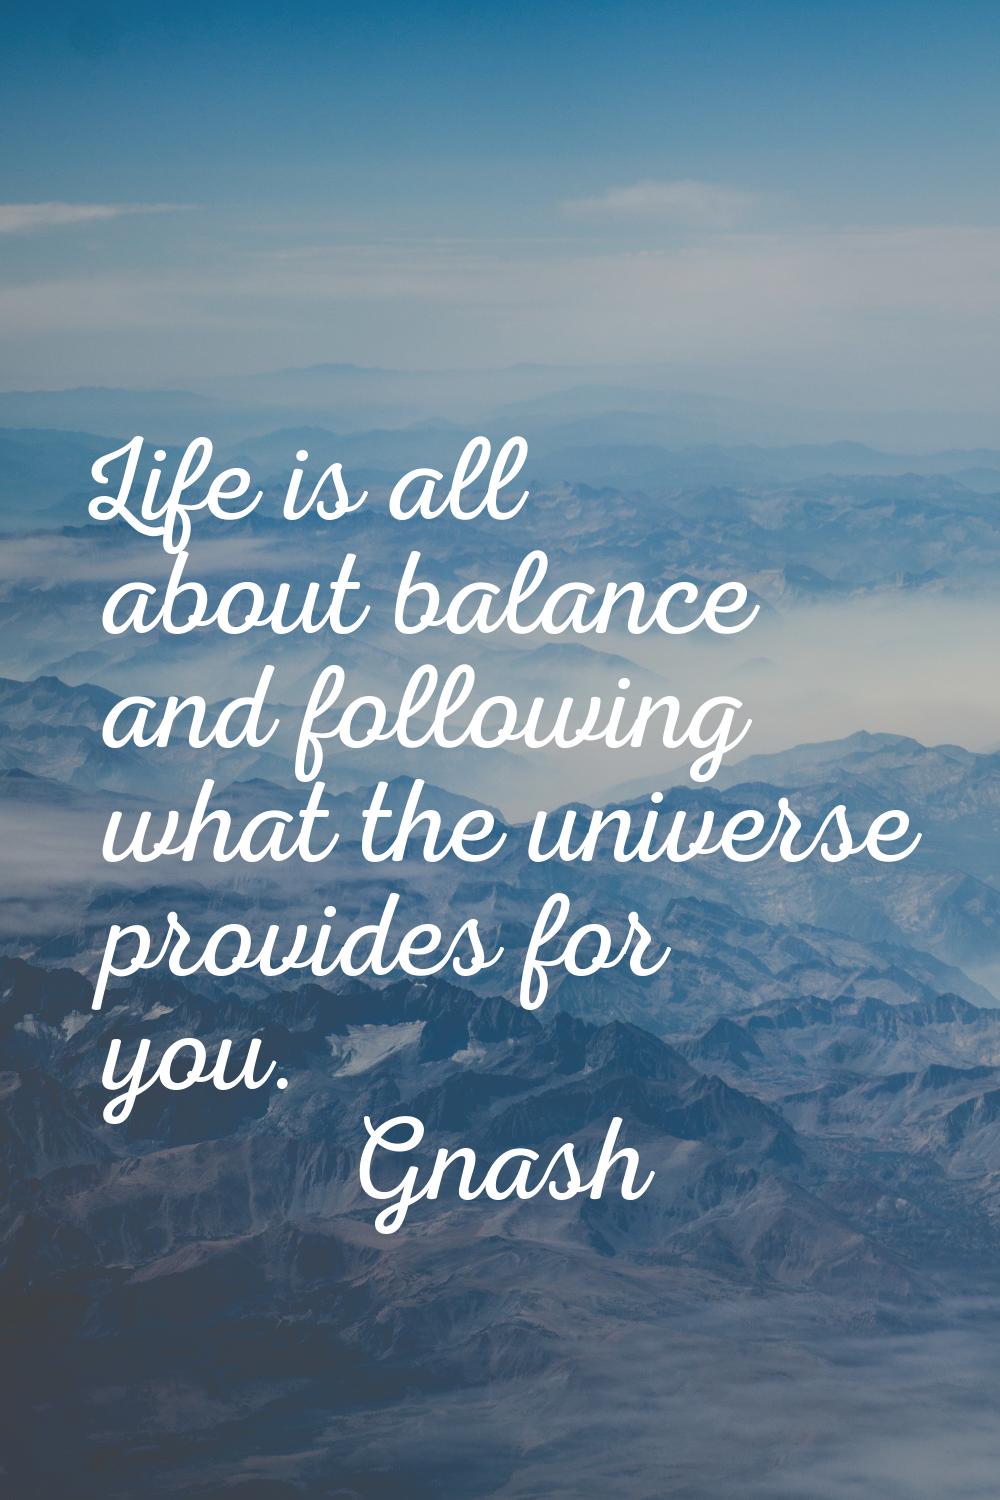 Life is all about balance and following what the universe provides for you.